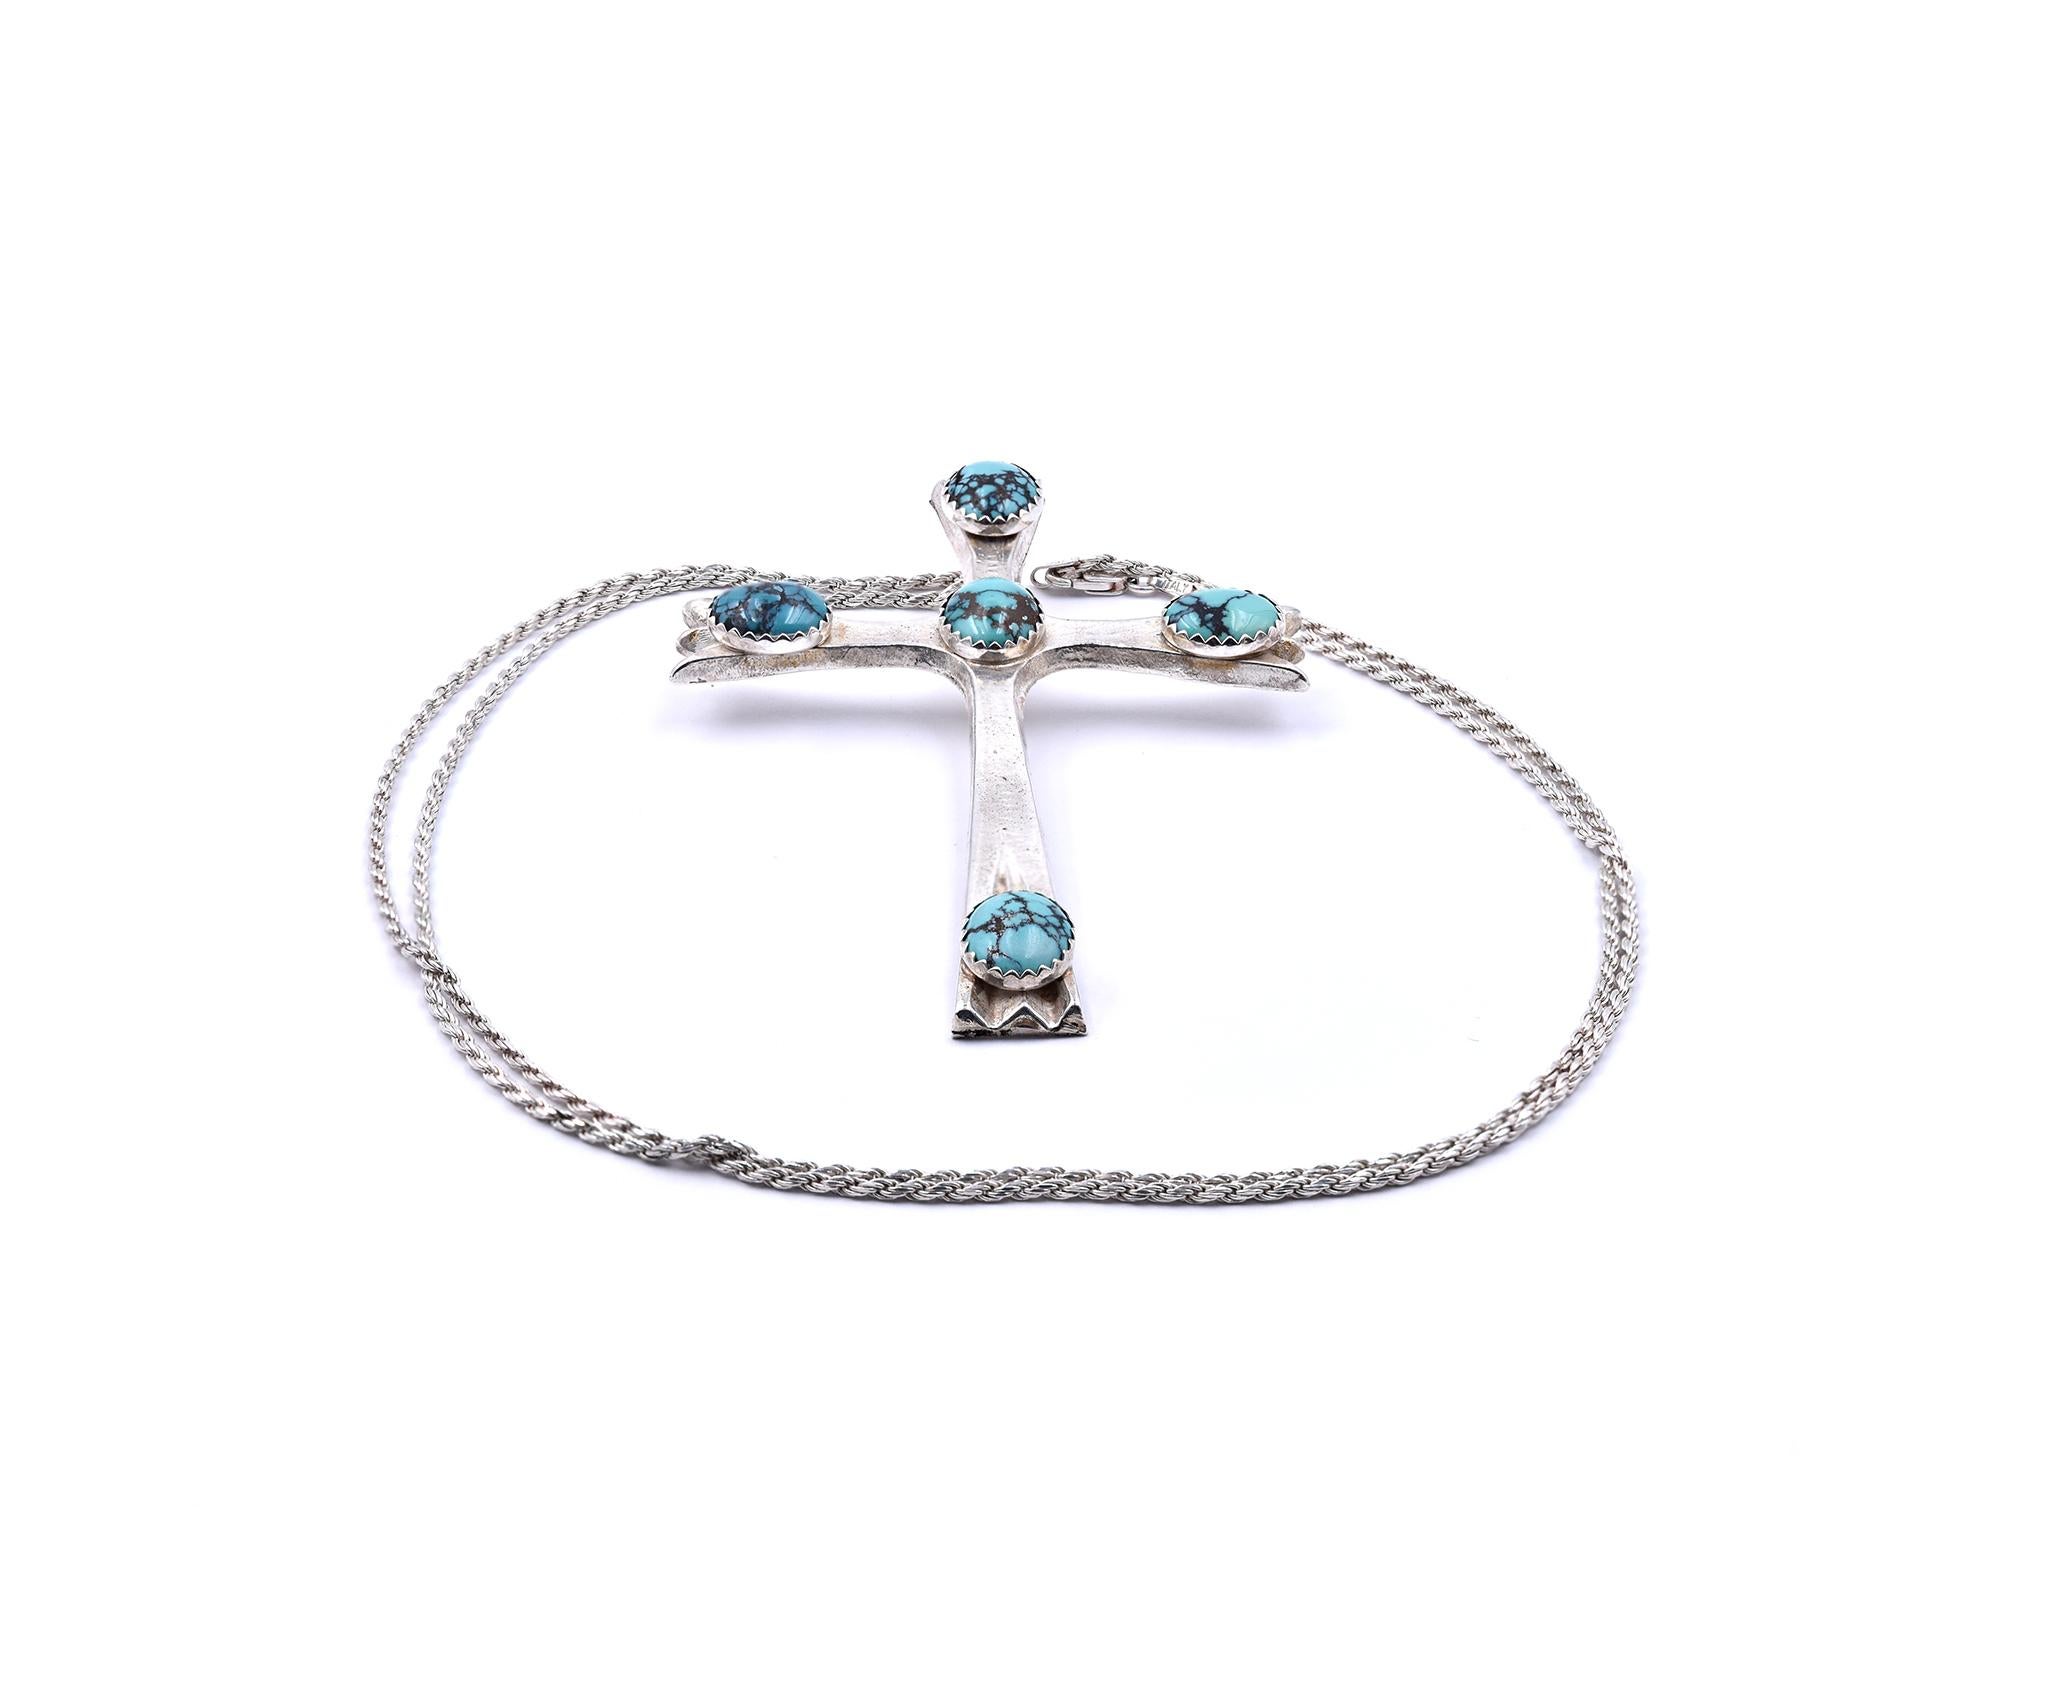 Designer: custom
Material: Sterling Silver 
Weight: 45.96 grams
Measurement: necklace measures 30-inches long, cross measures 3.75 x 2.5-inches 
